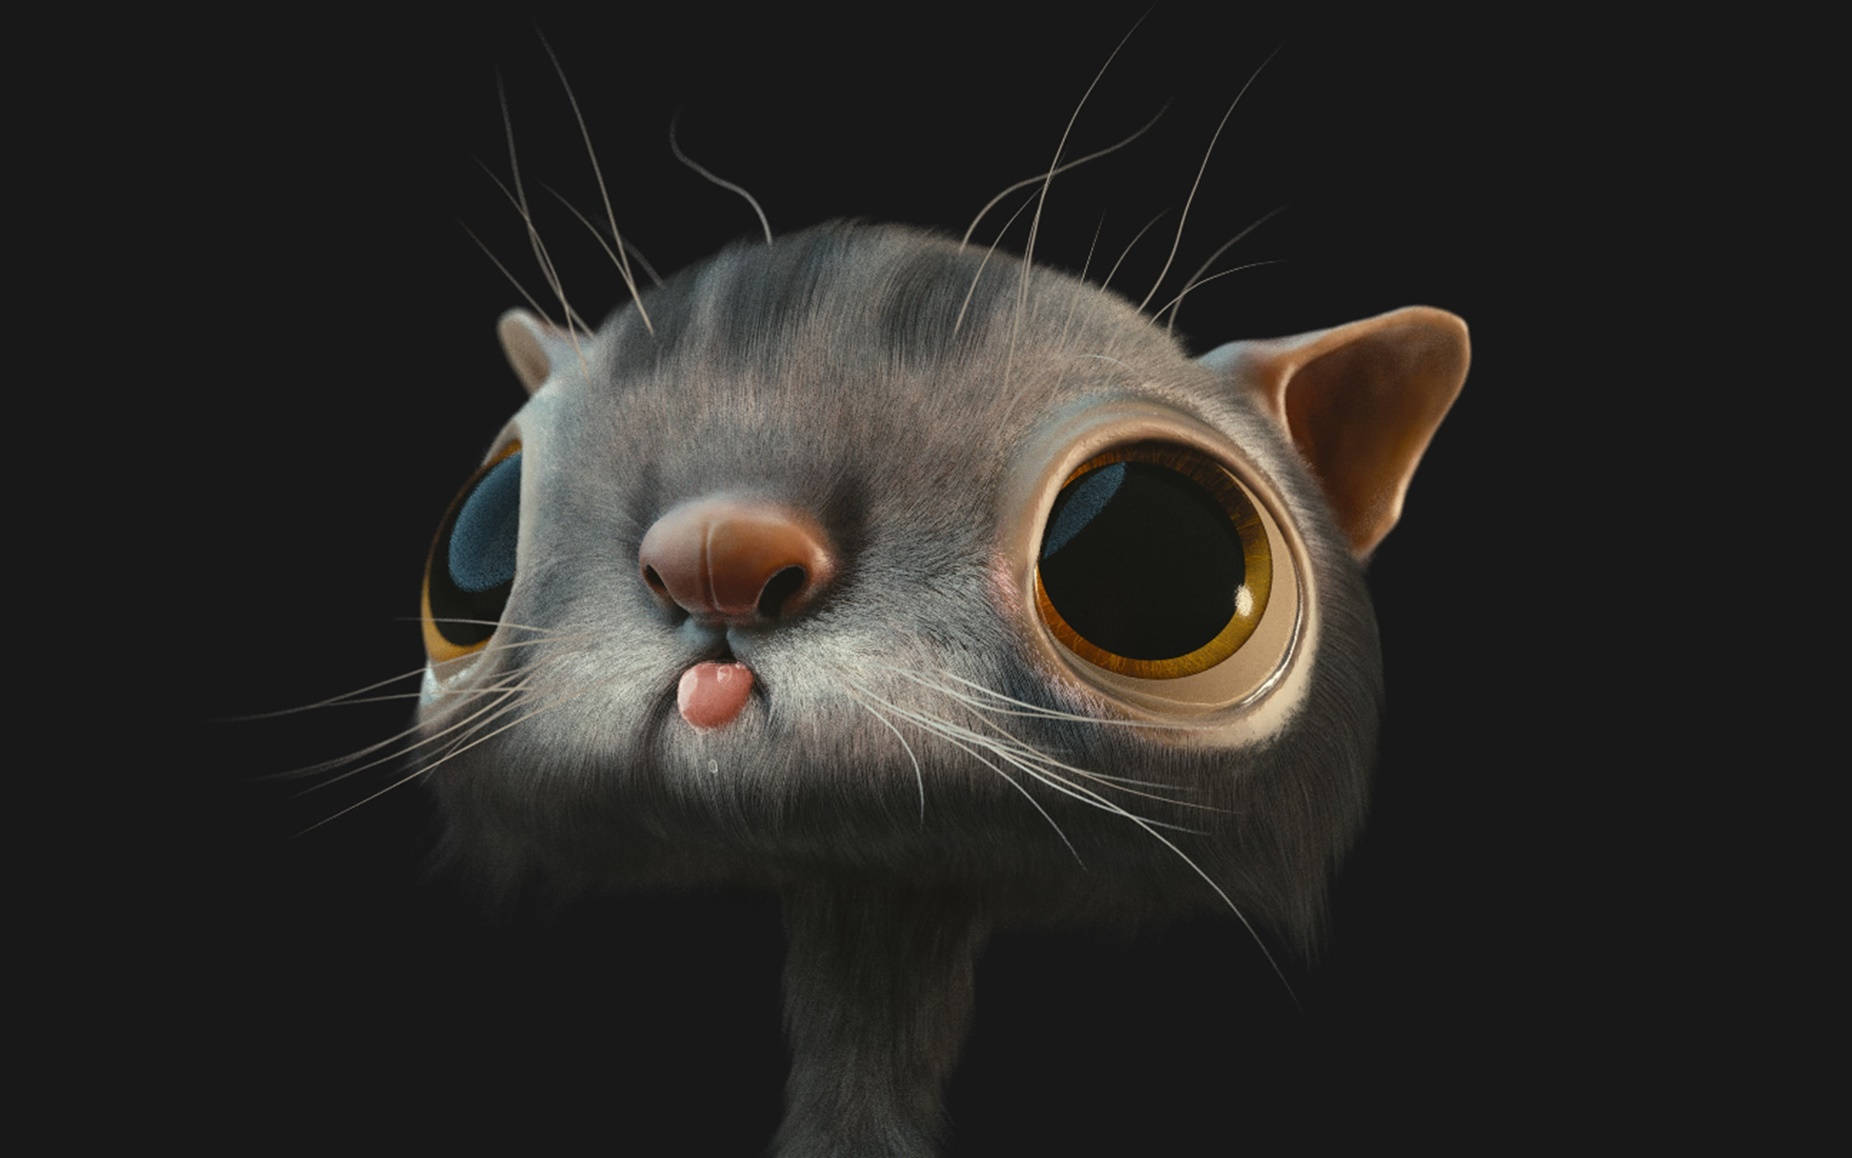 Gray Cat With Big Eyes 3d Animation Wallpaper